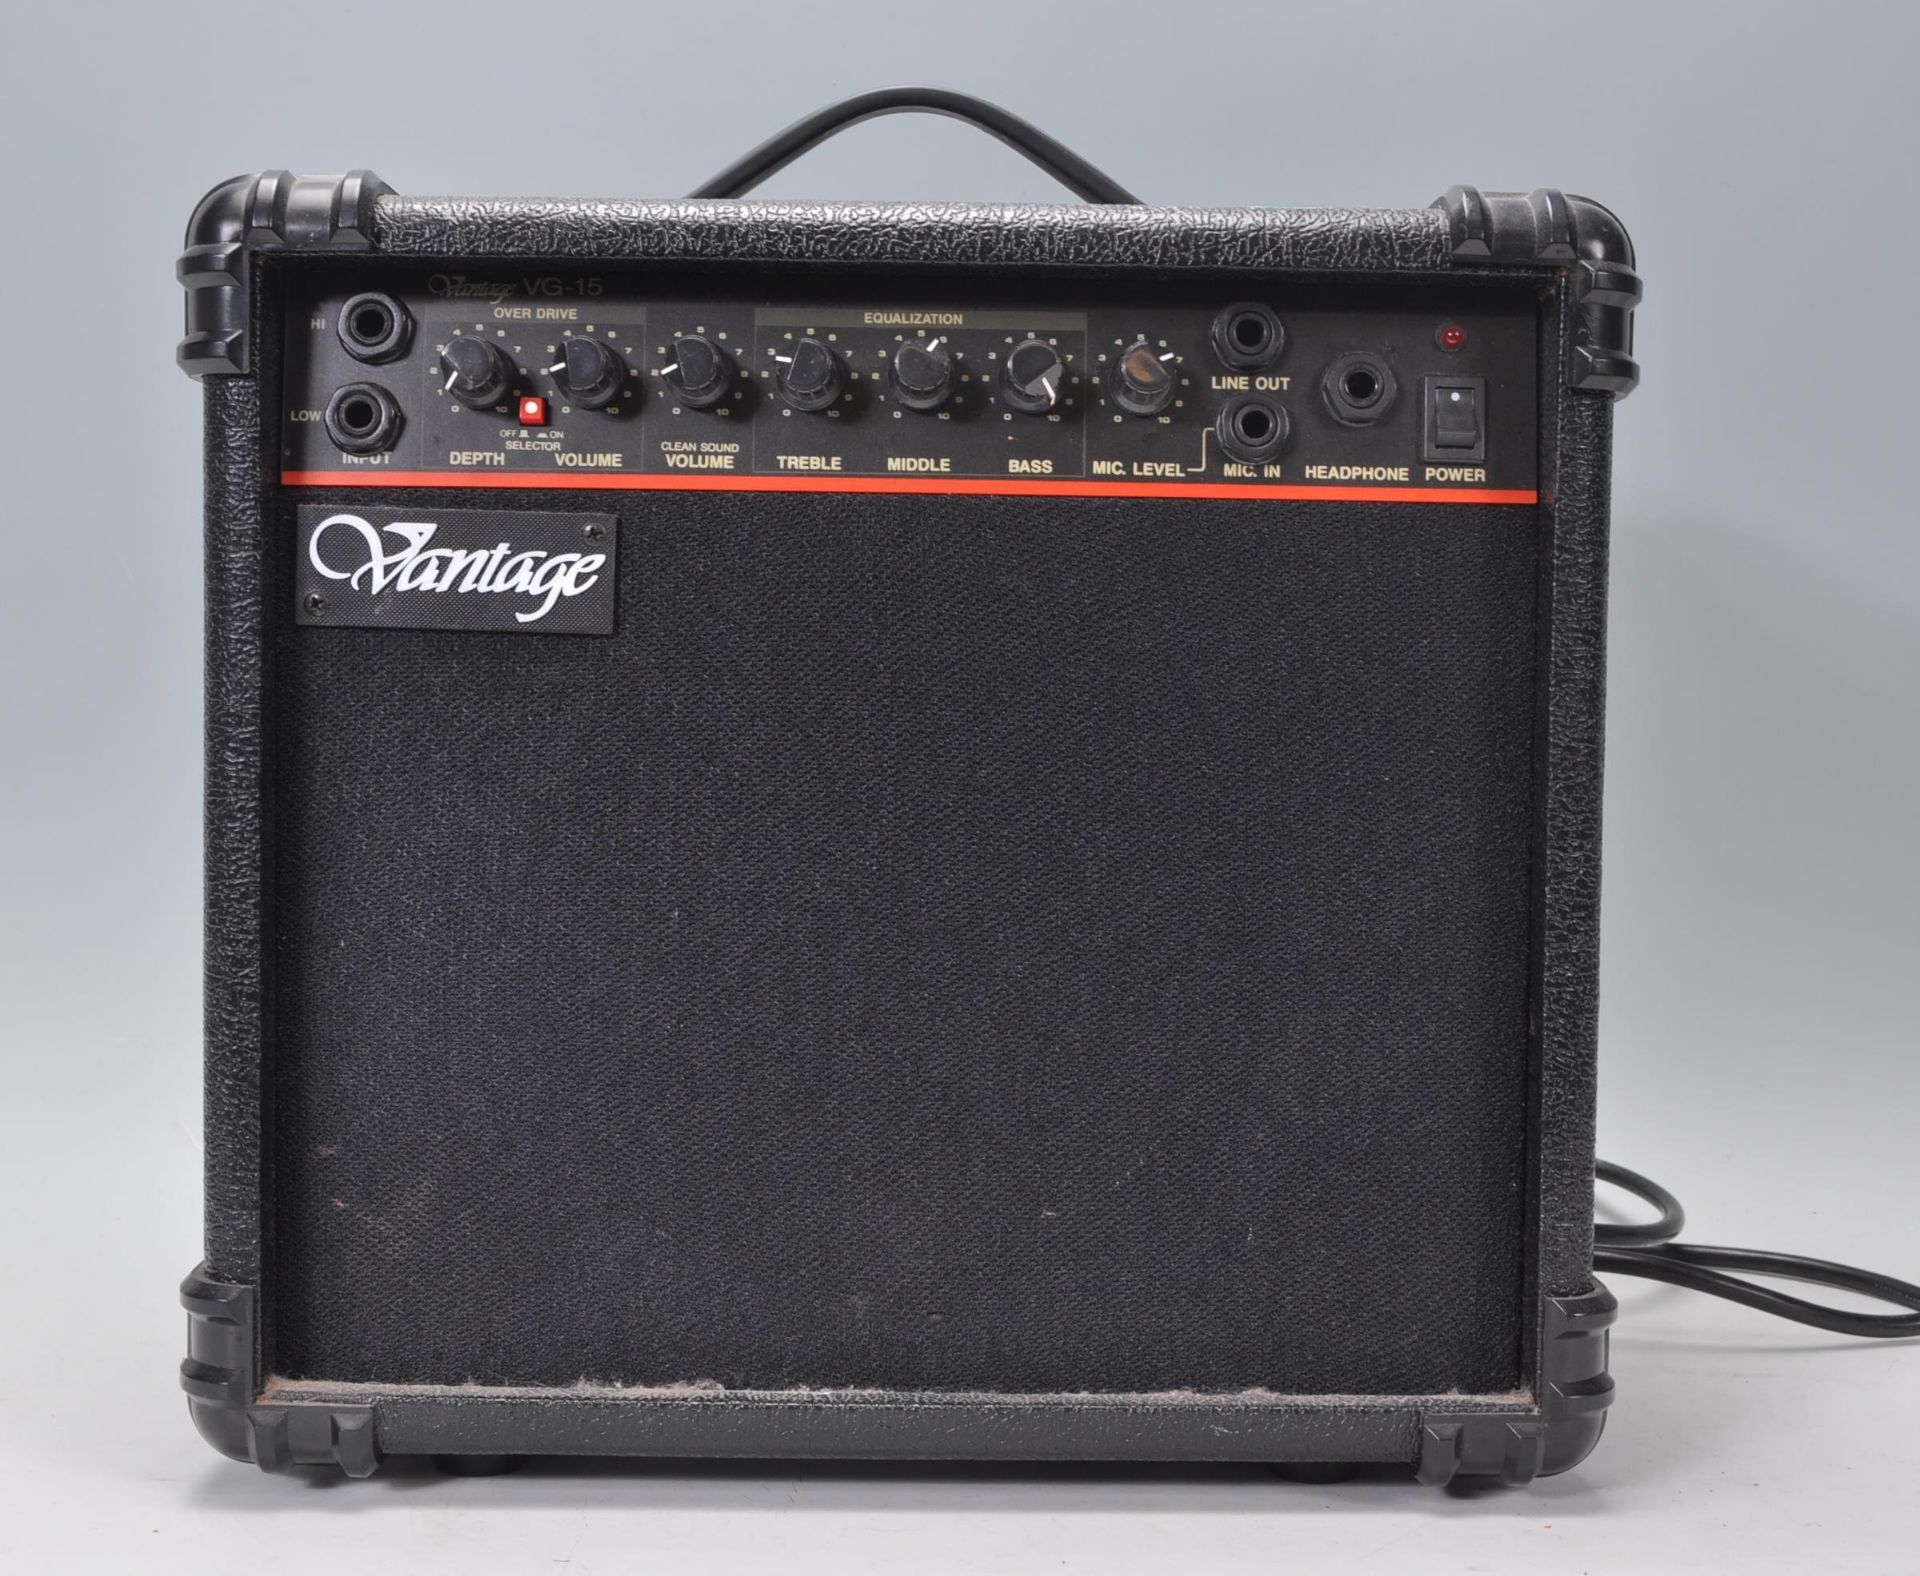 A contemporary 20th century Guitar amp by Vantage.